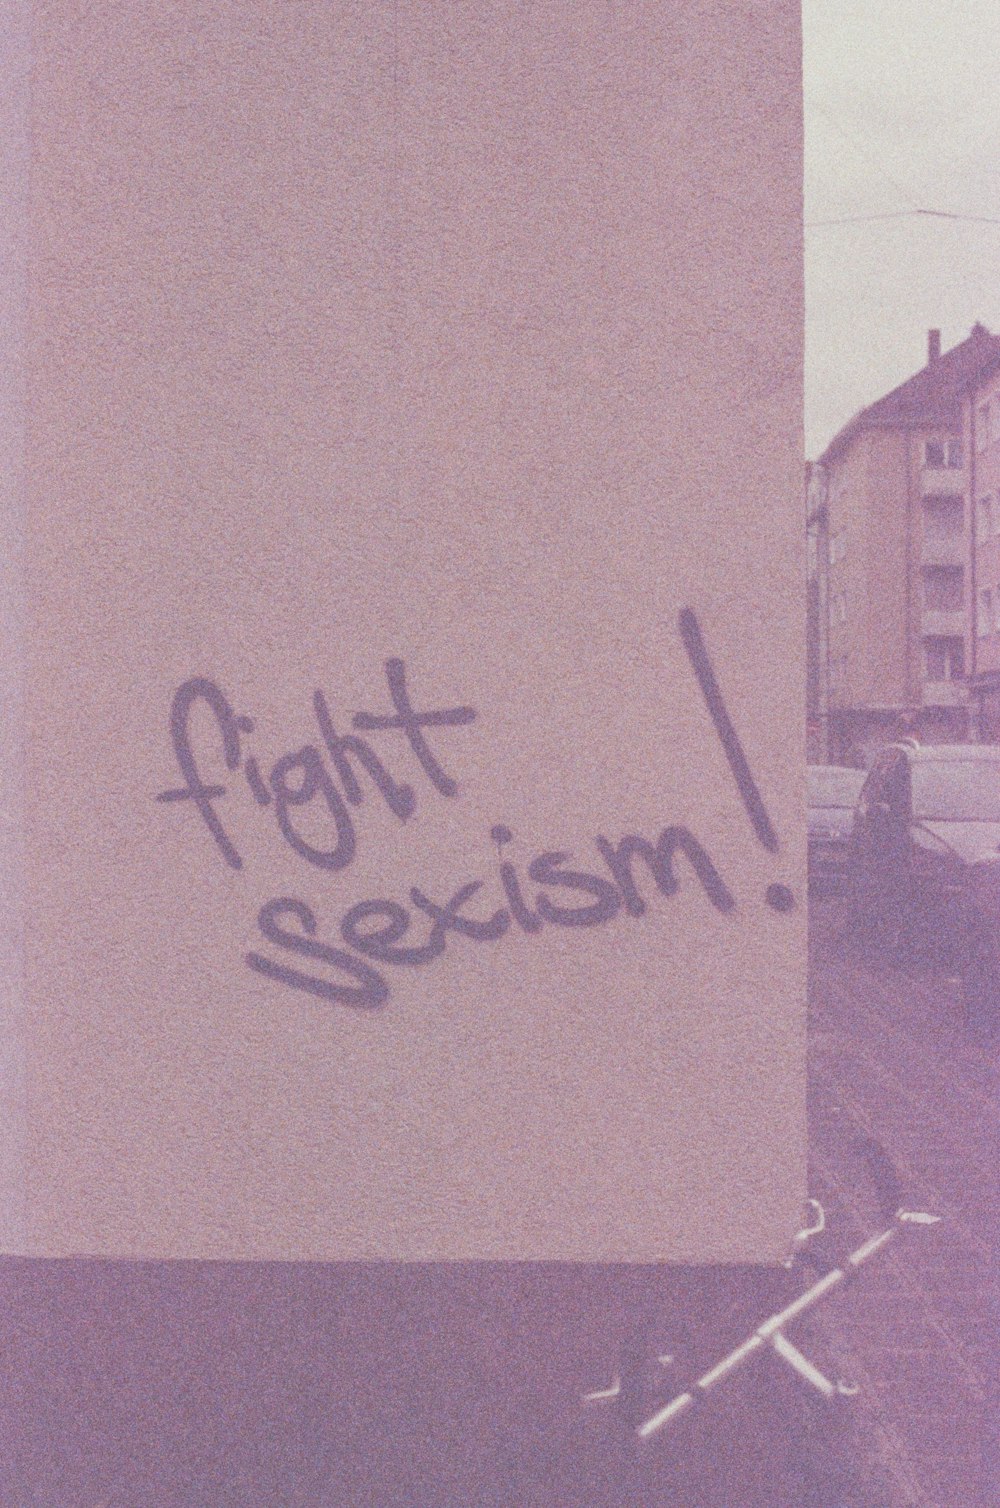 a sign that says fight sexism on it